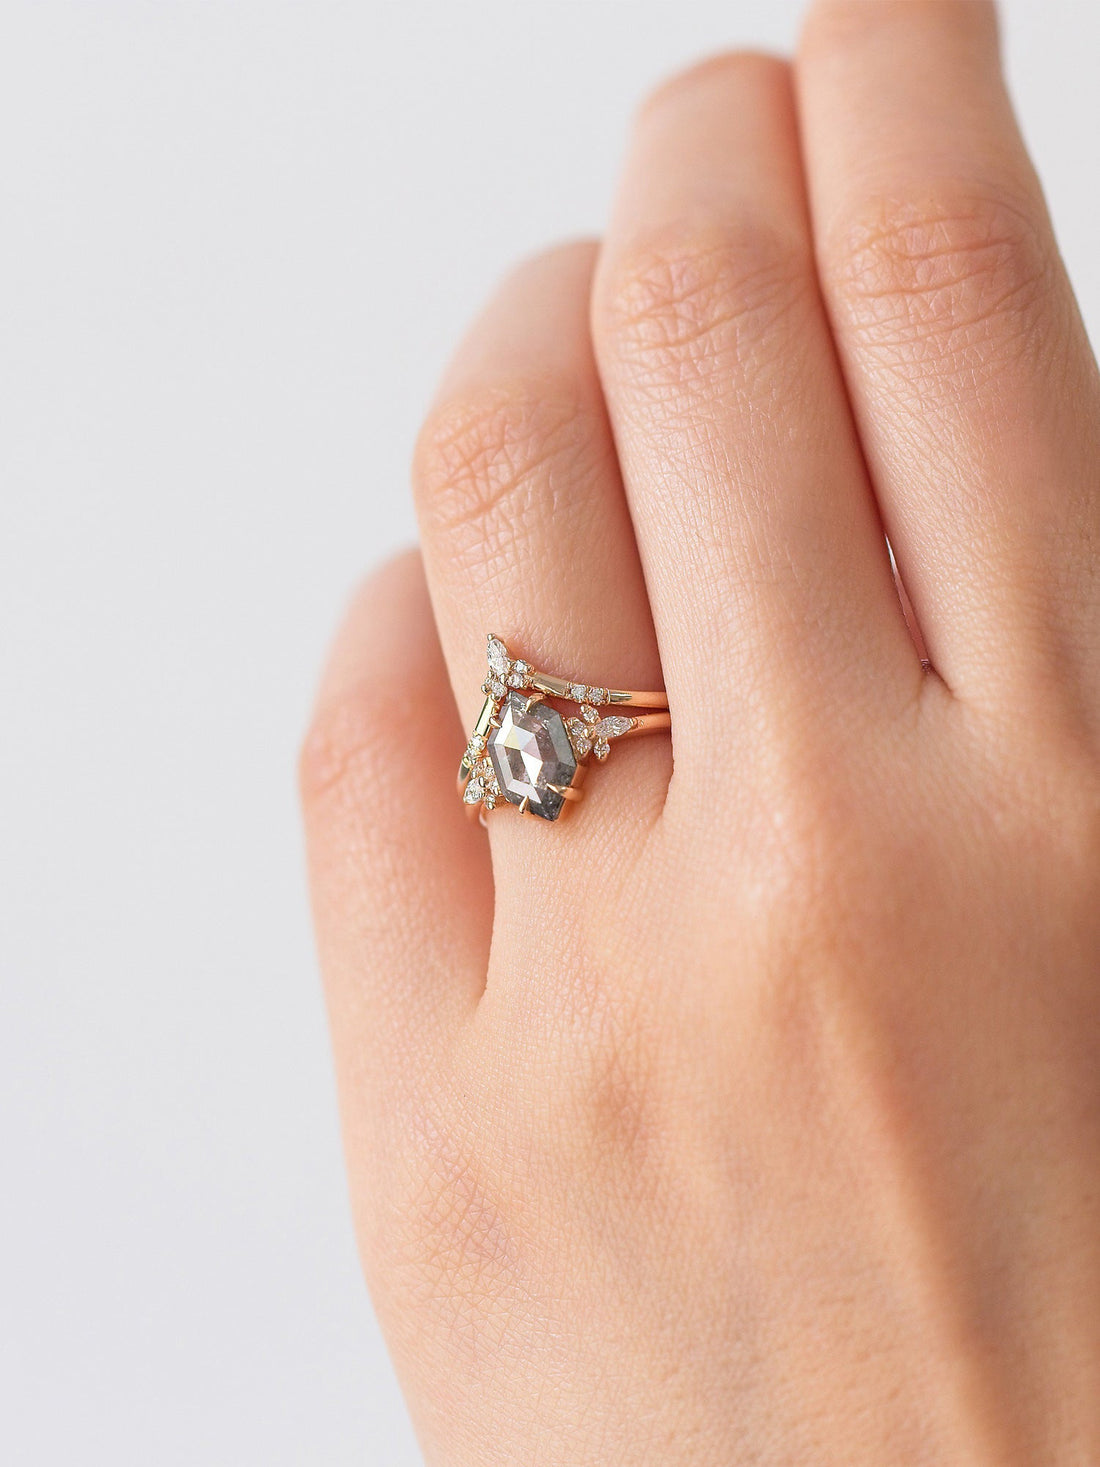 Minimalistic and art deco styled hexagon salt and pepper diamond engagement ring in 14k rose gold with a marquise and round diamonds arranged on each side on model&